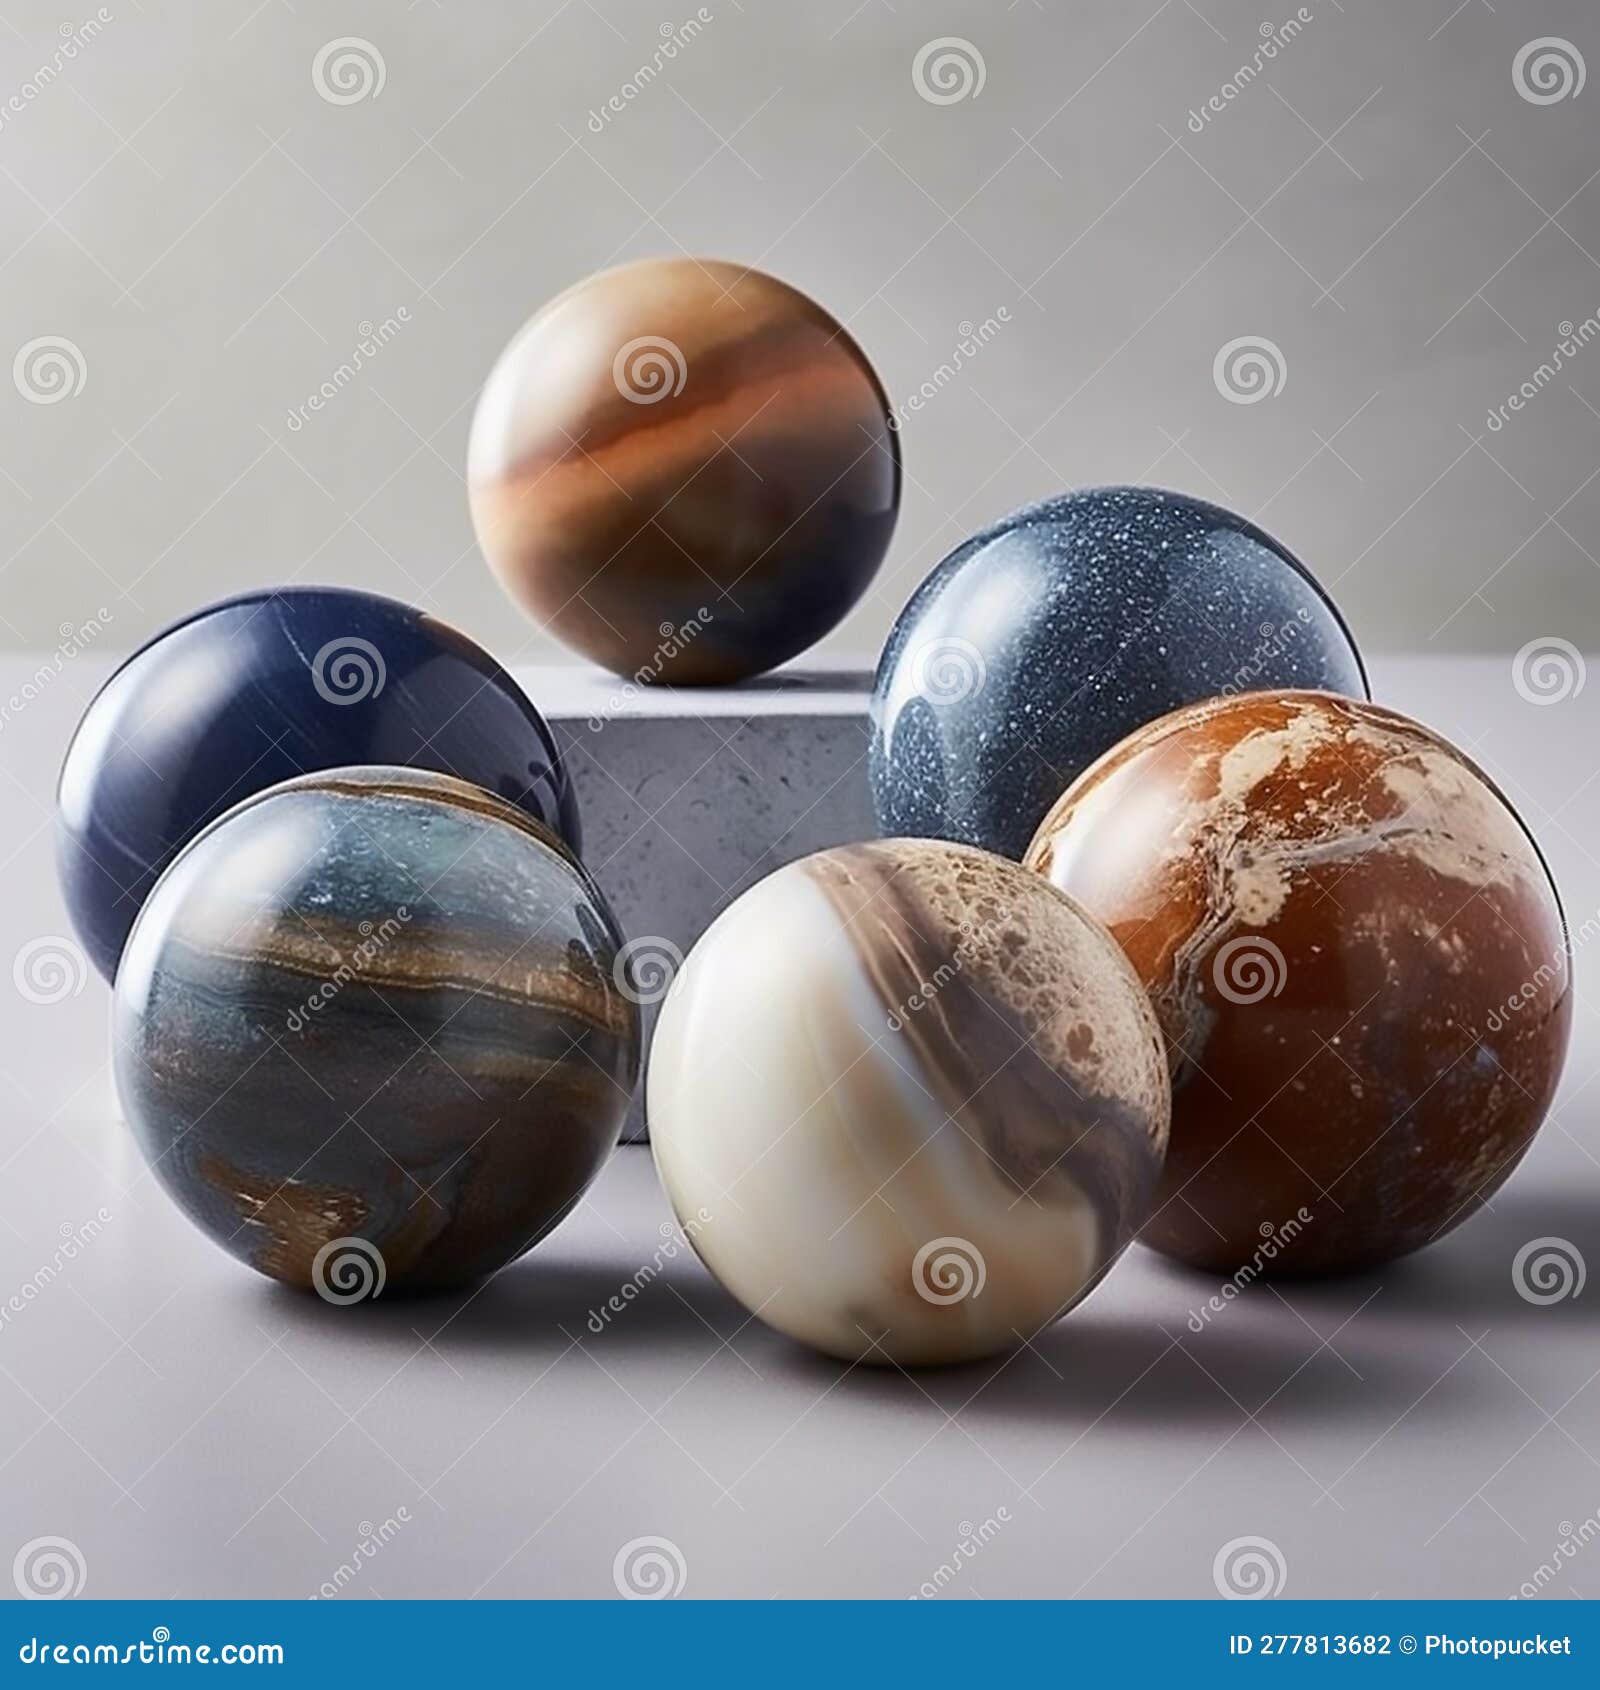 the stone paperweight collection